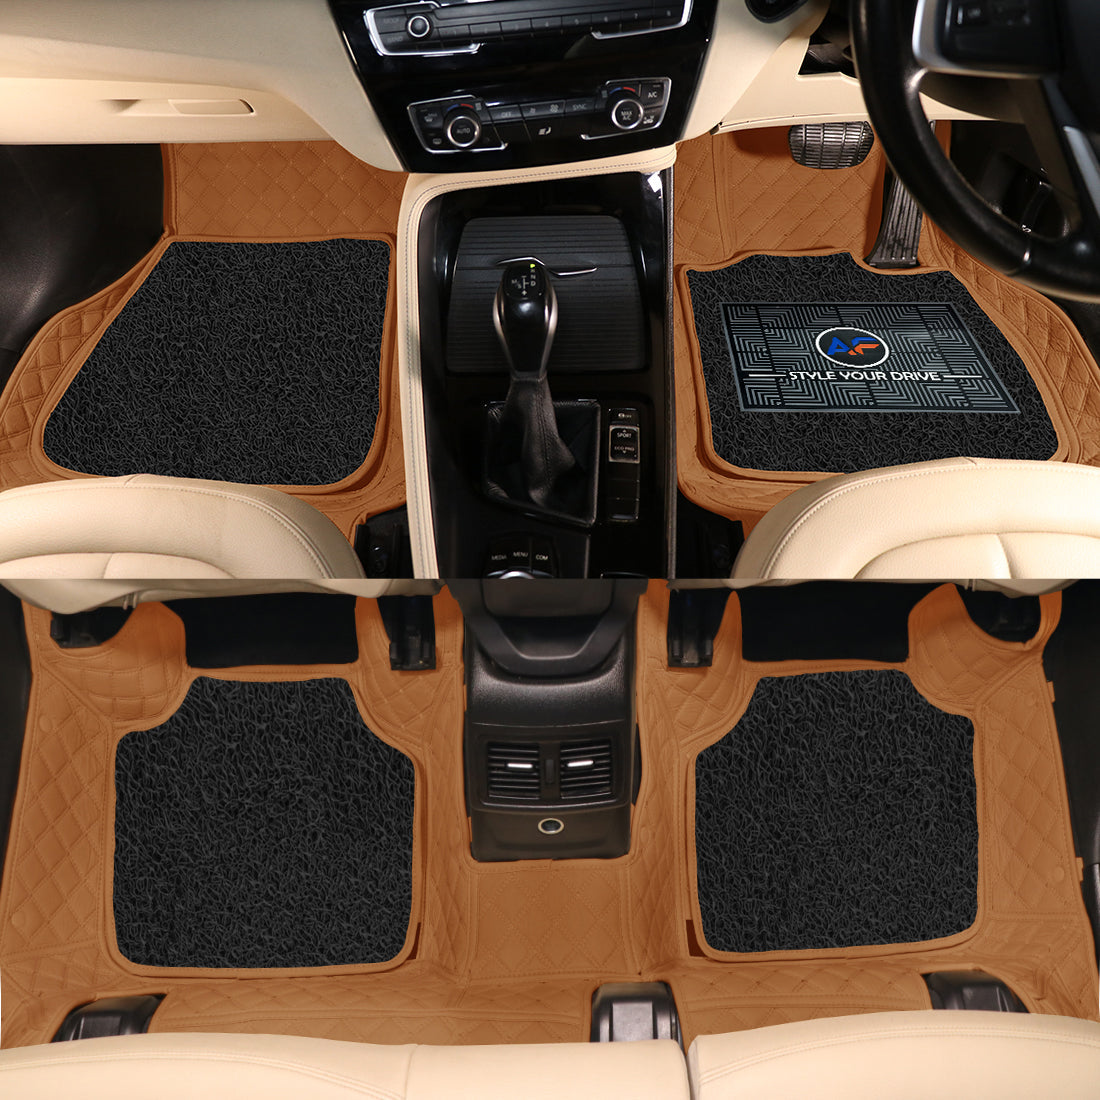 Mercedes B-Class 7D Luxury Car Mat, All Weather Proof, Anti-Skid, 100% Waterproof & Odorless with Unique Diamond Fish Design (24mm Luxury PU Leather, 2 Rows)